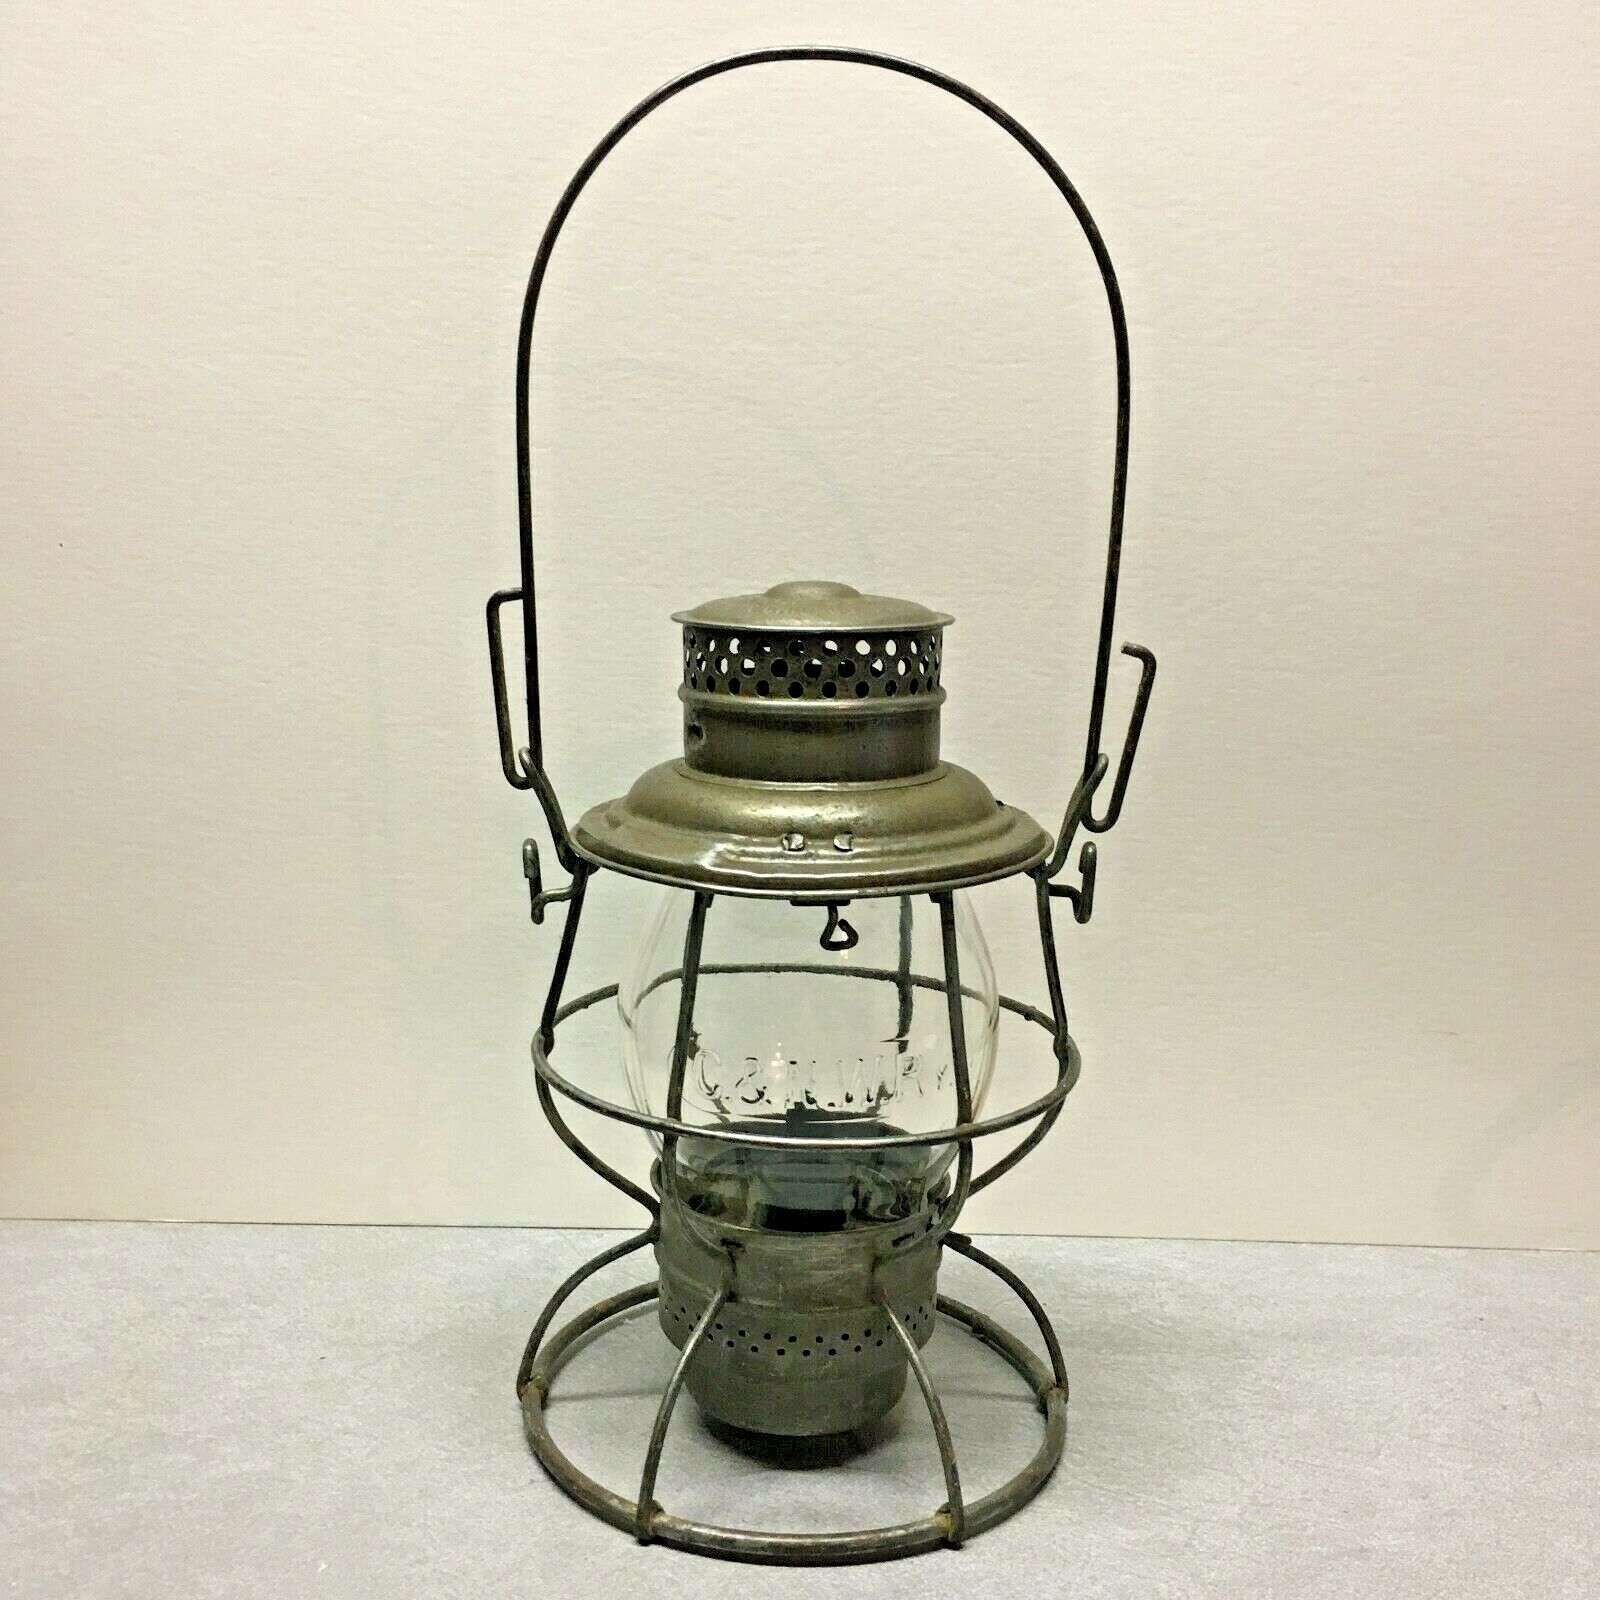 ADLAKE RELIABLE C & N.W. RY. Lantern with Embossed Clear Glass & Makers Mark Cnx